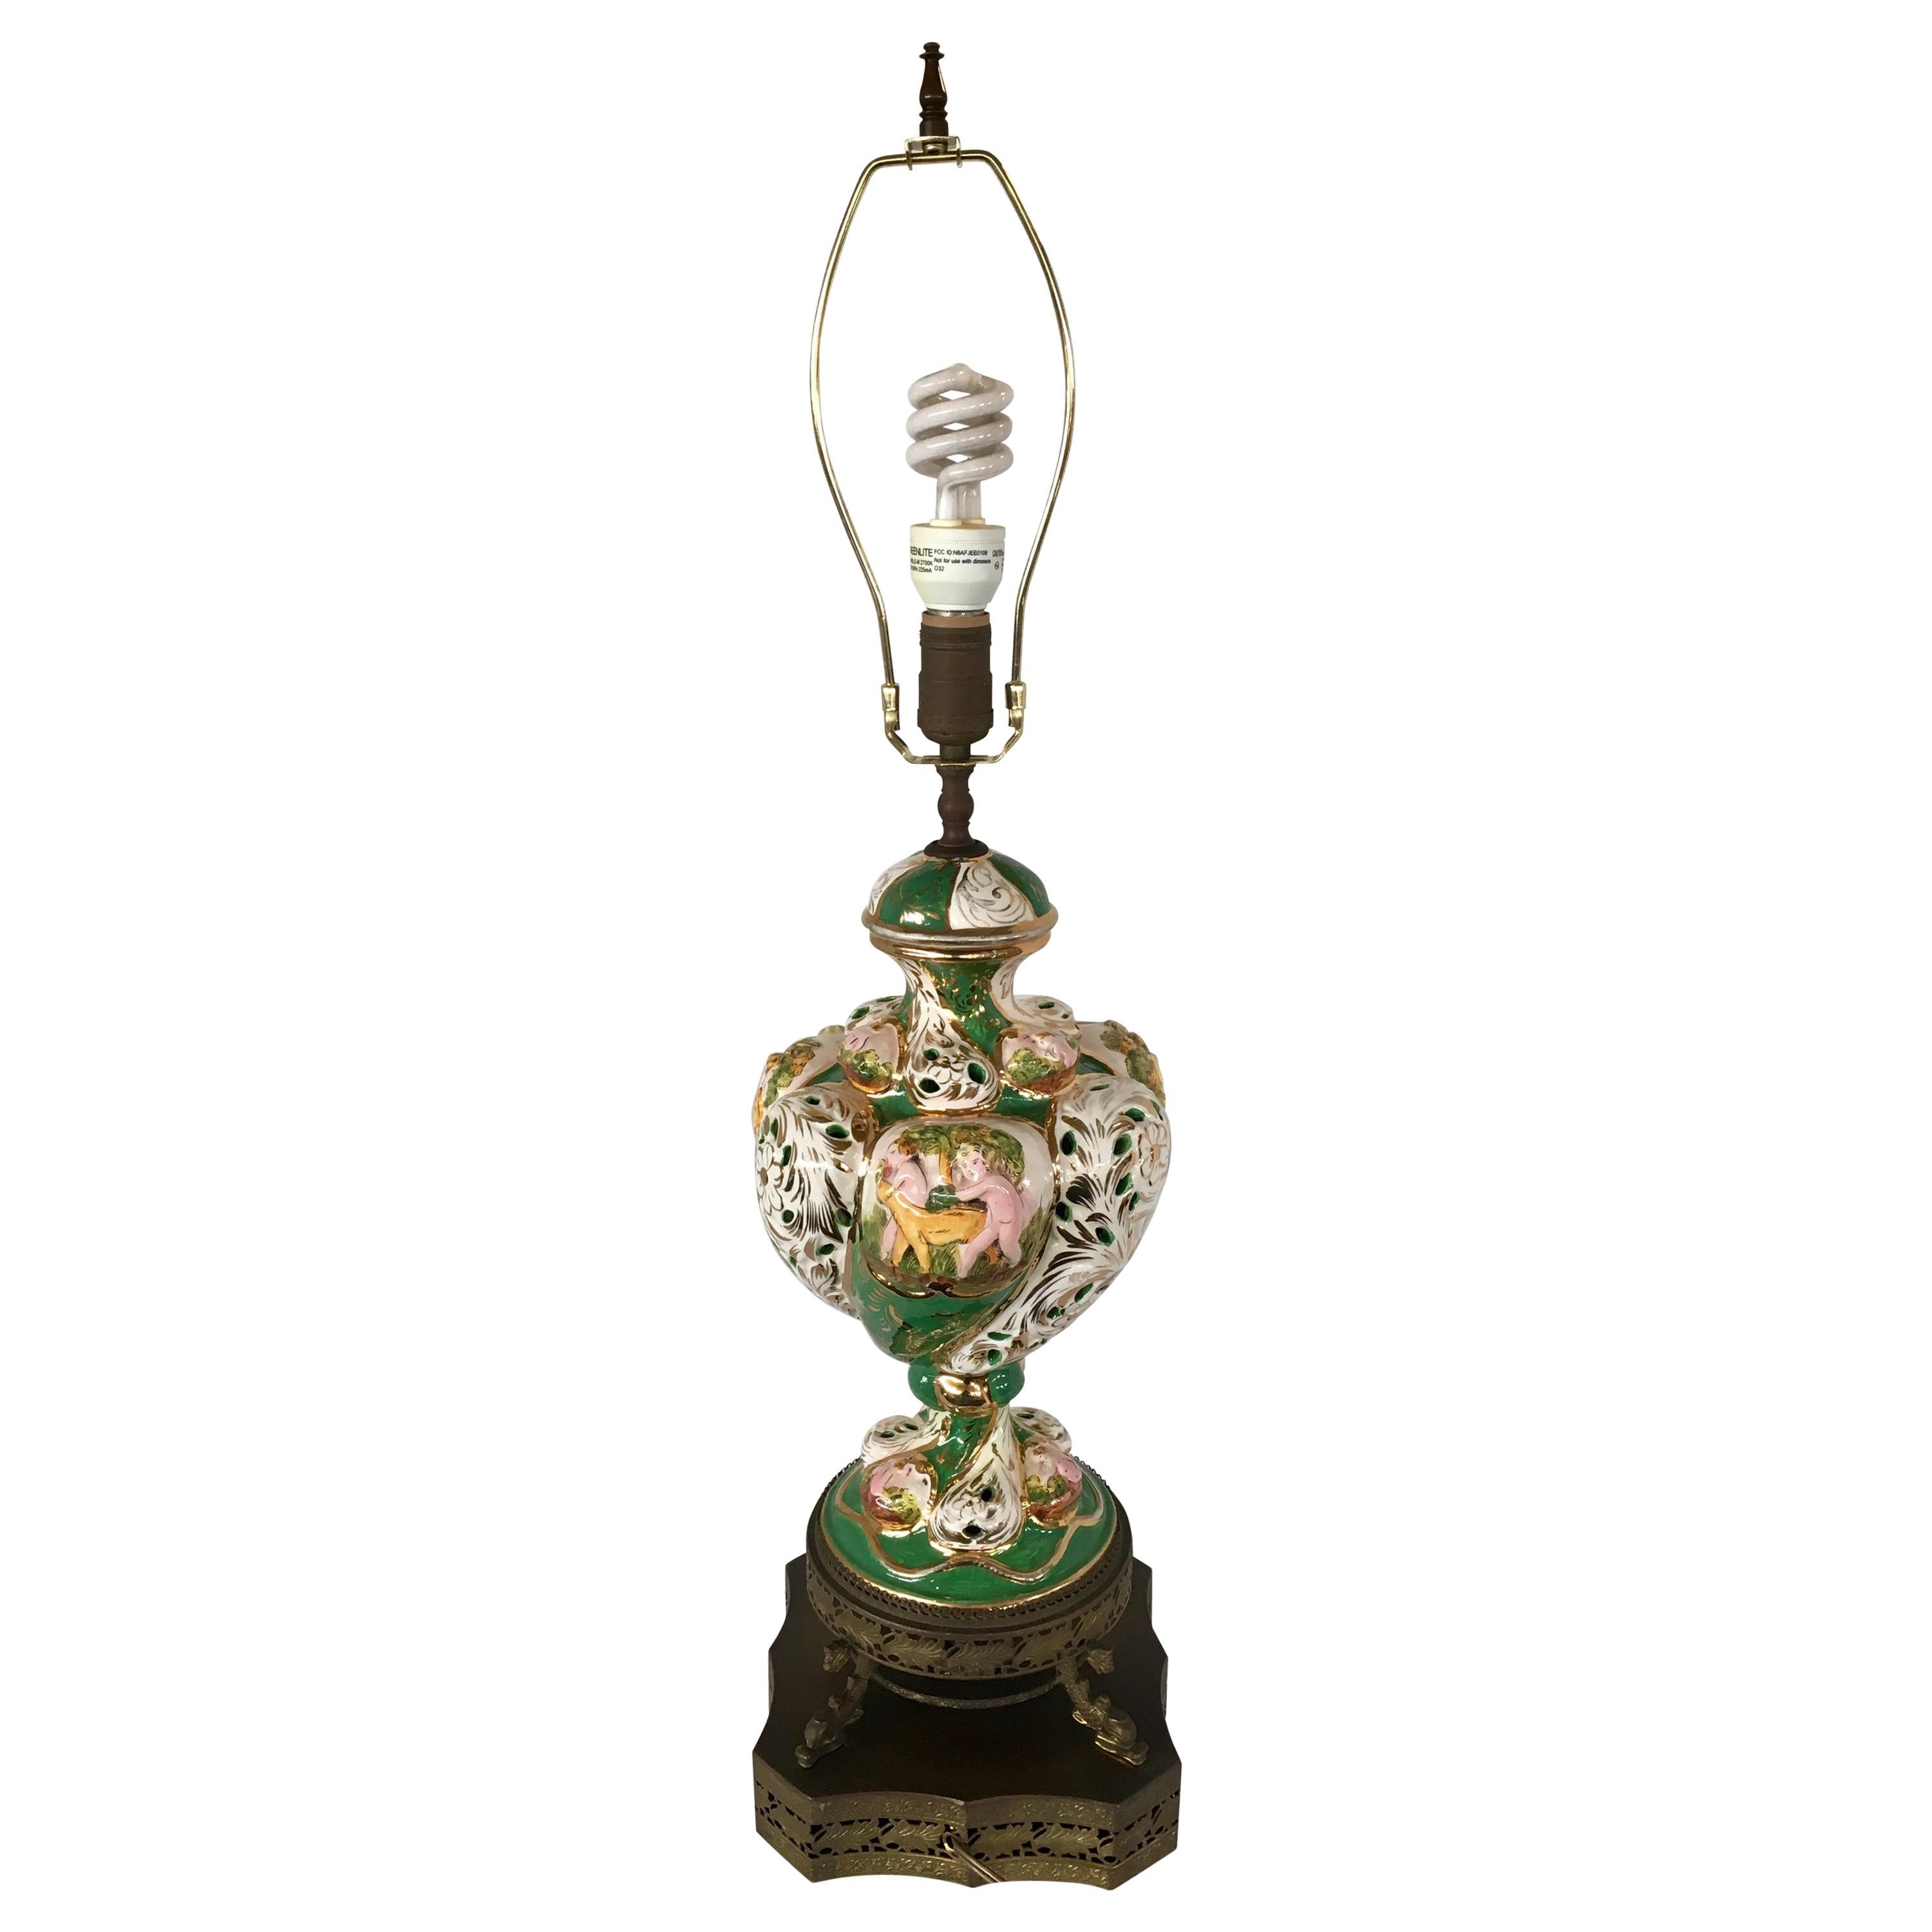 Ornate Porcelain Table Lamp Made in Italy